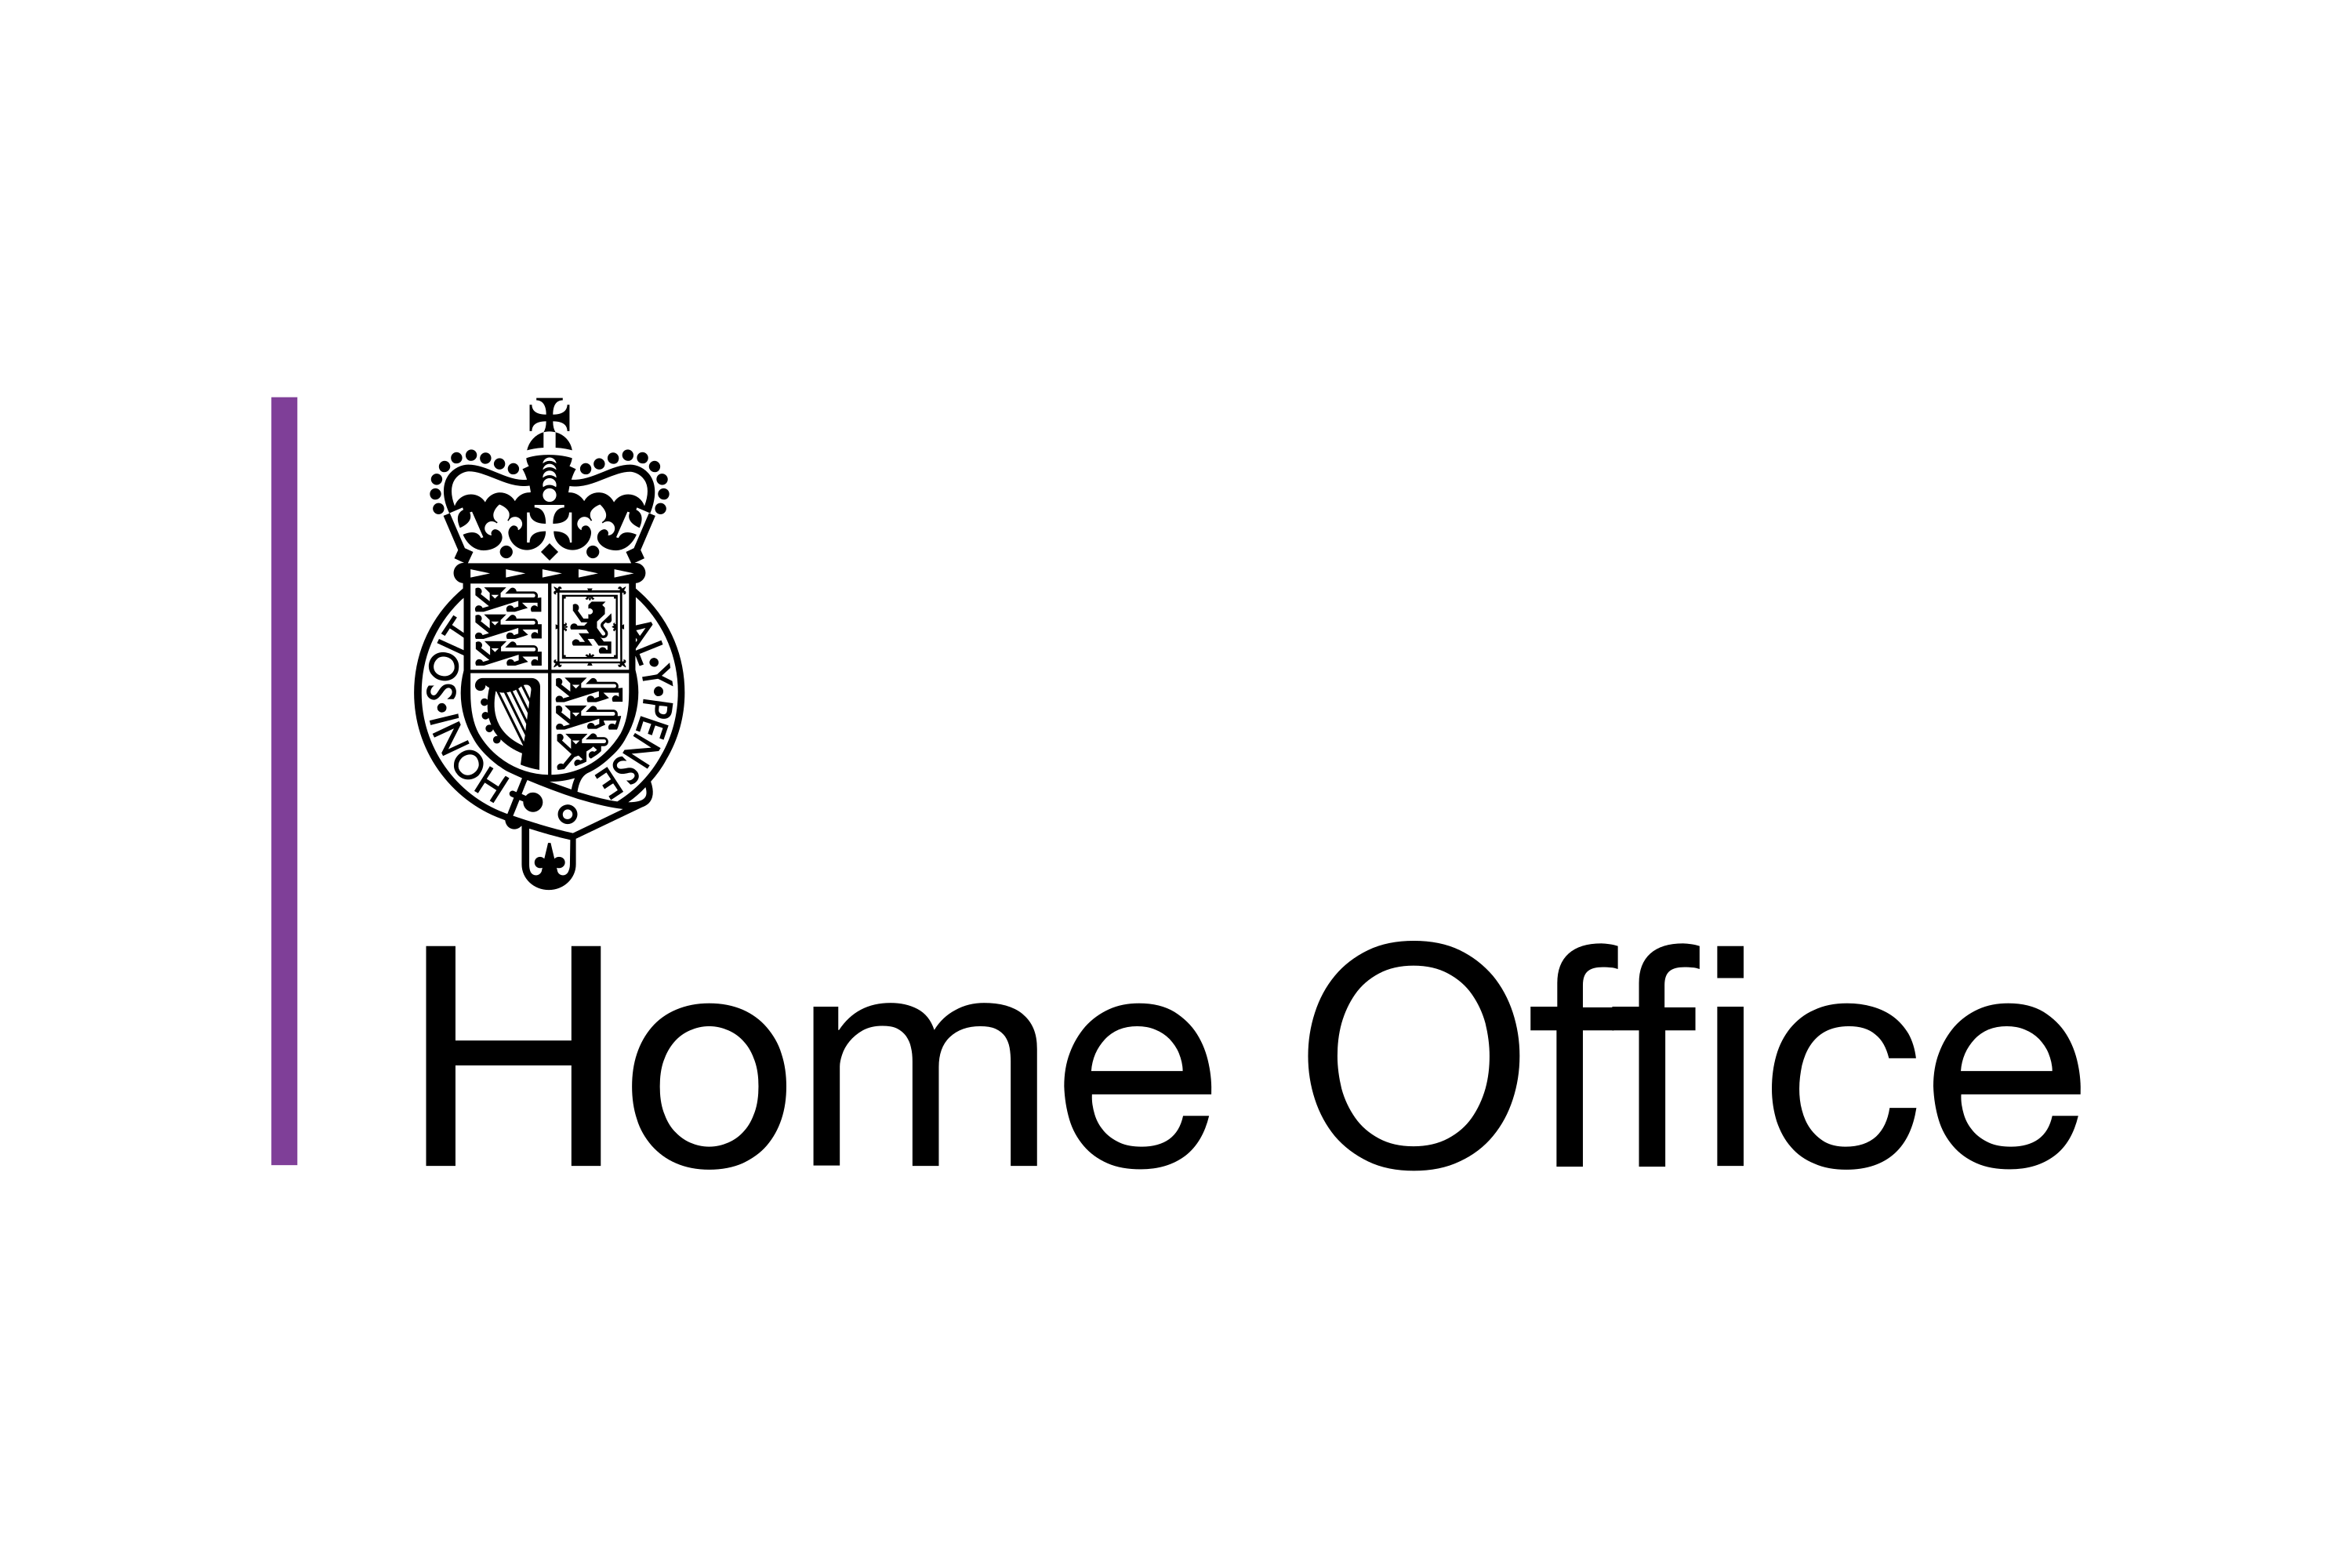 Download Home Office (Home Department) Logo in SVG Vector or PNG File ...